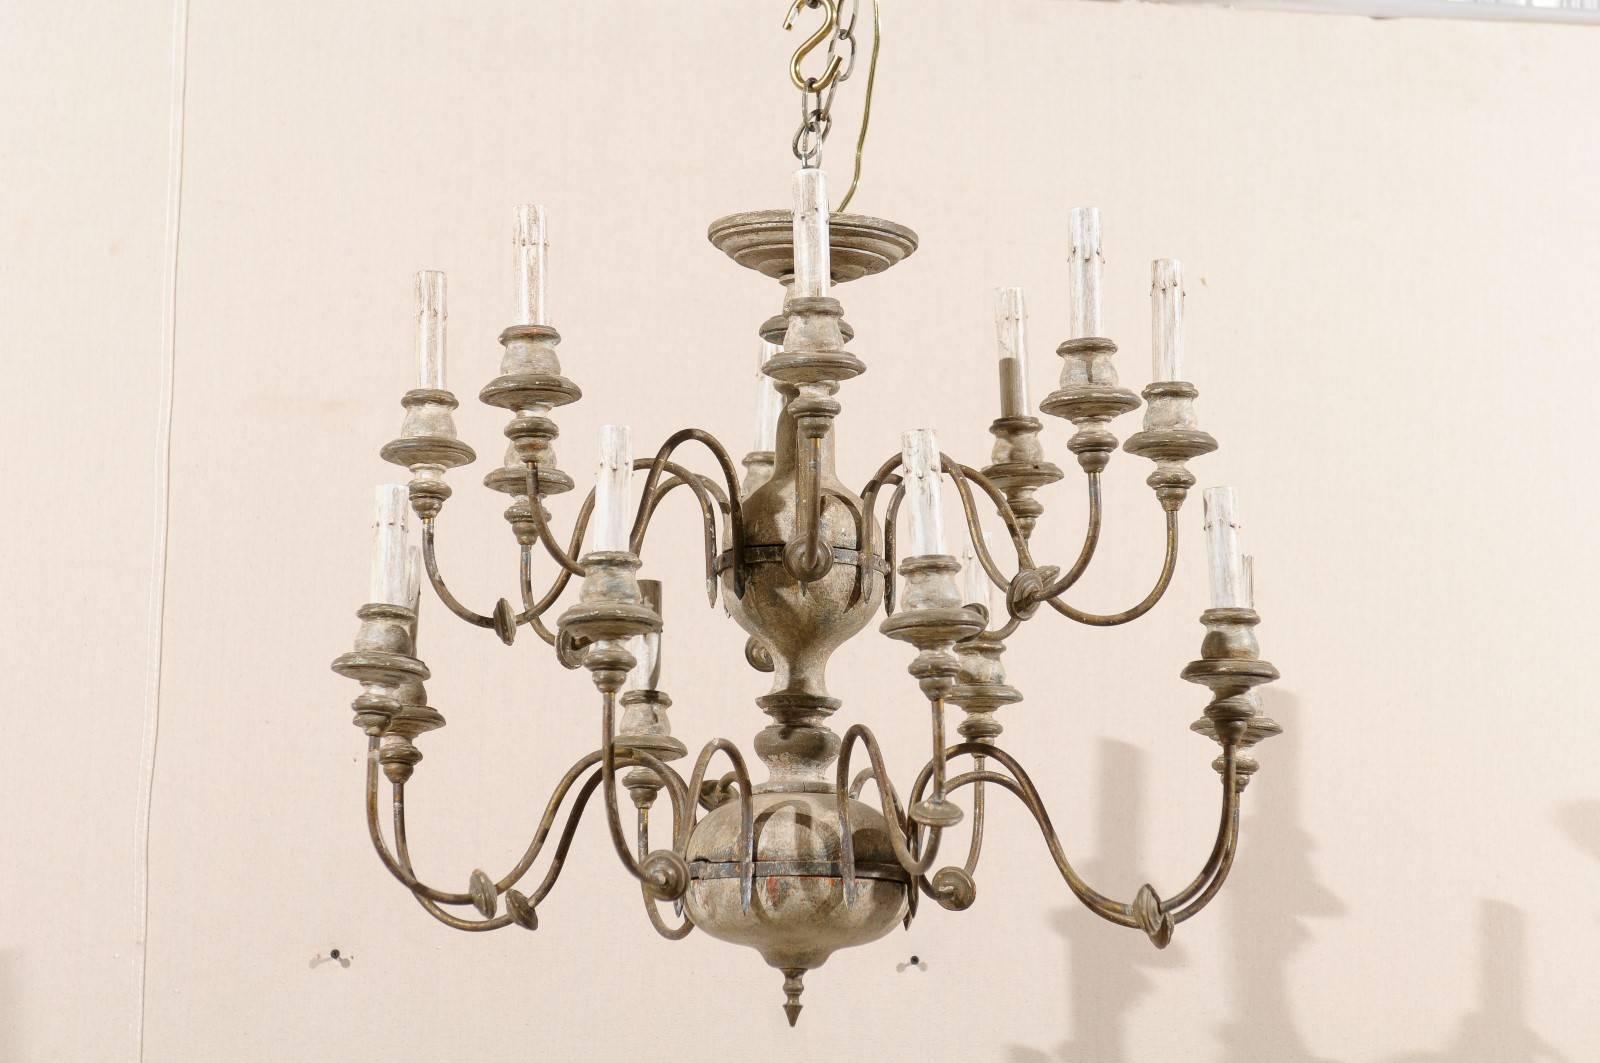 An Italian two-tiered sixteen-light painted wood and metal chandelier. This elegantly flowing 20th century Italian chandelier features a bottom and top level of swag arms and lights. These lights are on metal s-scroll swoop arms and connect to a